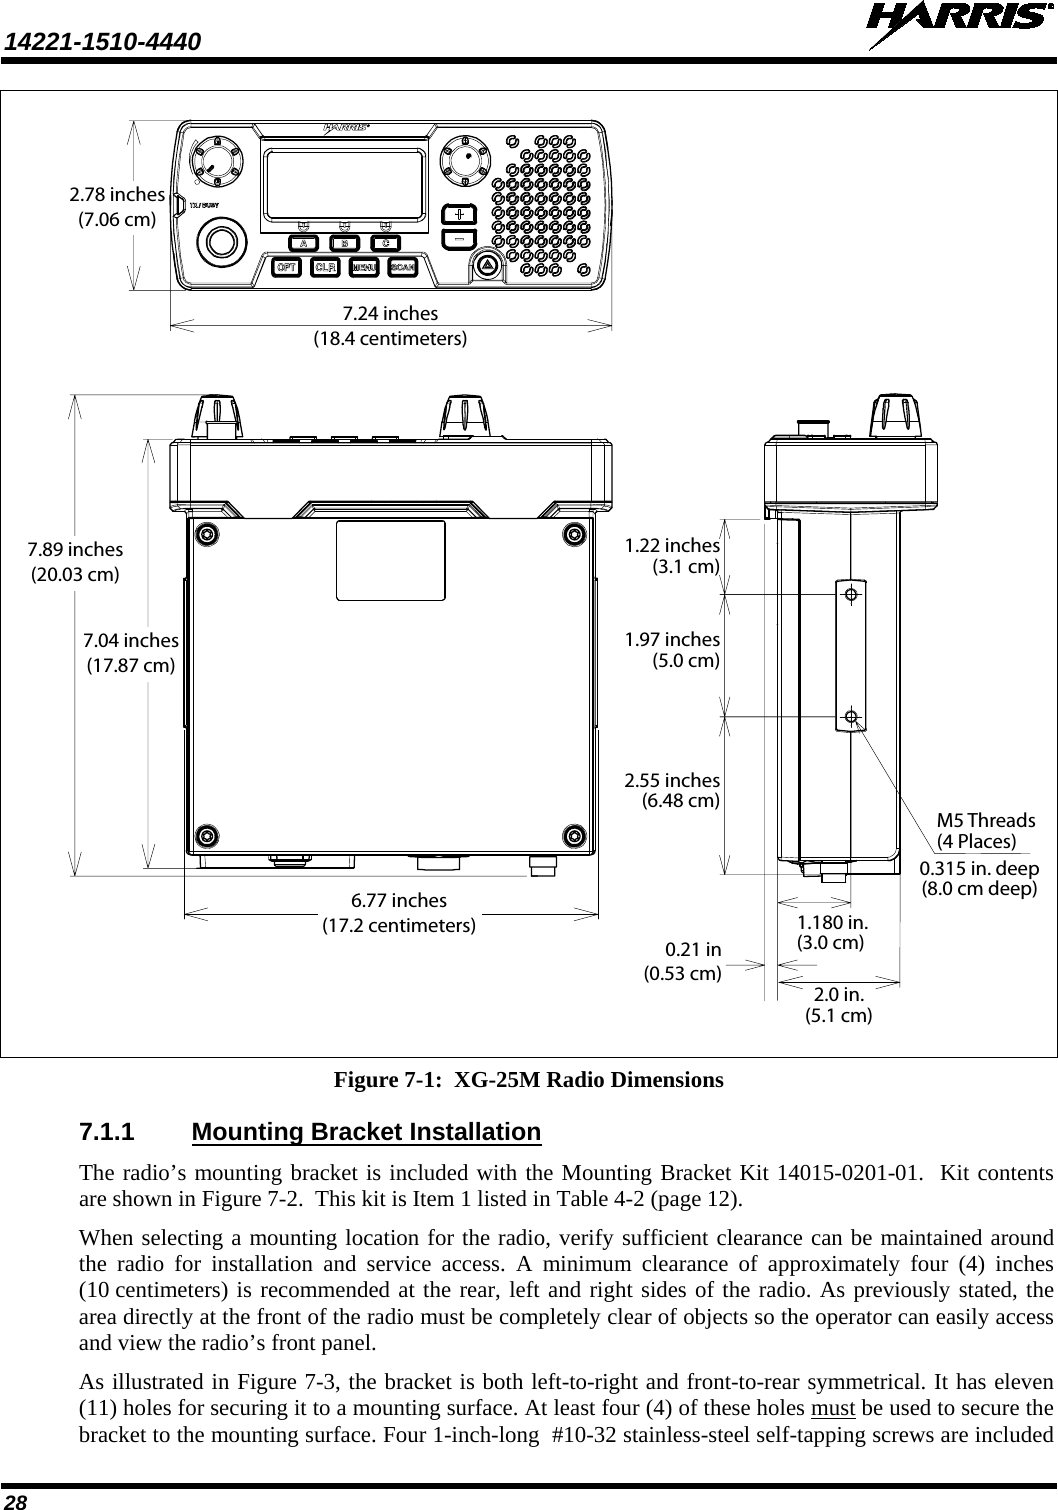 14221-1510-4440   28    Figure 7-1:  XG-25M Radio Dimensions 7.1.1 Mounting Bracket Installation The radio’s mounting bracket is included with the Mounting Bracket Kit 14015-0201-01.  Kit contents are shown in Figure 7-2.  This kit is Item 1 listed in Table 4-2 (page 12). When selecting a mounting location for the radio, verify sufficient clearance can be maintained around the radio for installation and service access. A minimum clearance of approximately four (4) inches (10 centimeters) is recommended at the rear, left and right sides of the radio. As previously stated, the area directly at the front of the radio must be completely clear of objects so the operator can easily access and view the radio’s front panel. As illustrated in Figure 7-3, the bracket is both left-to-right and front-to-rear symmetrical. It has eleven (11) holes for securing it to a mounting surface. At least four (4) of these holes must be used to secure the bracket to the mounting surface. Four 1-inch-long  #10-32 stainless-steel self-tapping screws are included 7.24 inches(18.4 centimeters)2.78 inches(7.06 cm)7.04 inches(17.87 cm)7.89 inches(20.03 cm)2.0 in.(5.1 cm)0.315 in. deep(8.0 cm deep)M5 Threads(4 Places)1.180 in.(3.0 cm)0.21 in(0.53 cm)6.77 inches(17.2 centimeters)1.97 inches(5.0 cm)1.22 inches(3.1 cm)2.55 inches(6.48 cm)